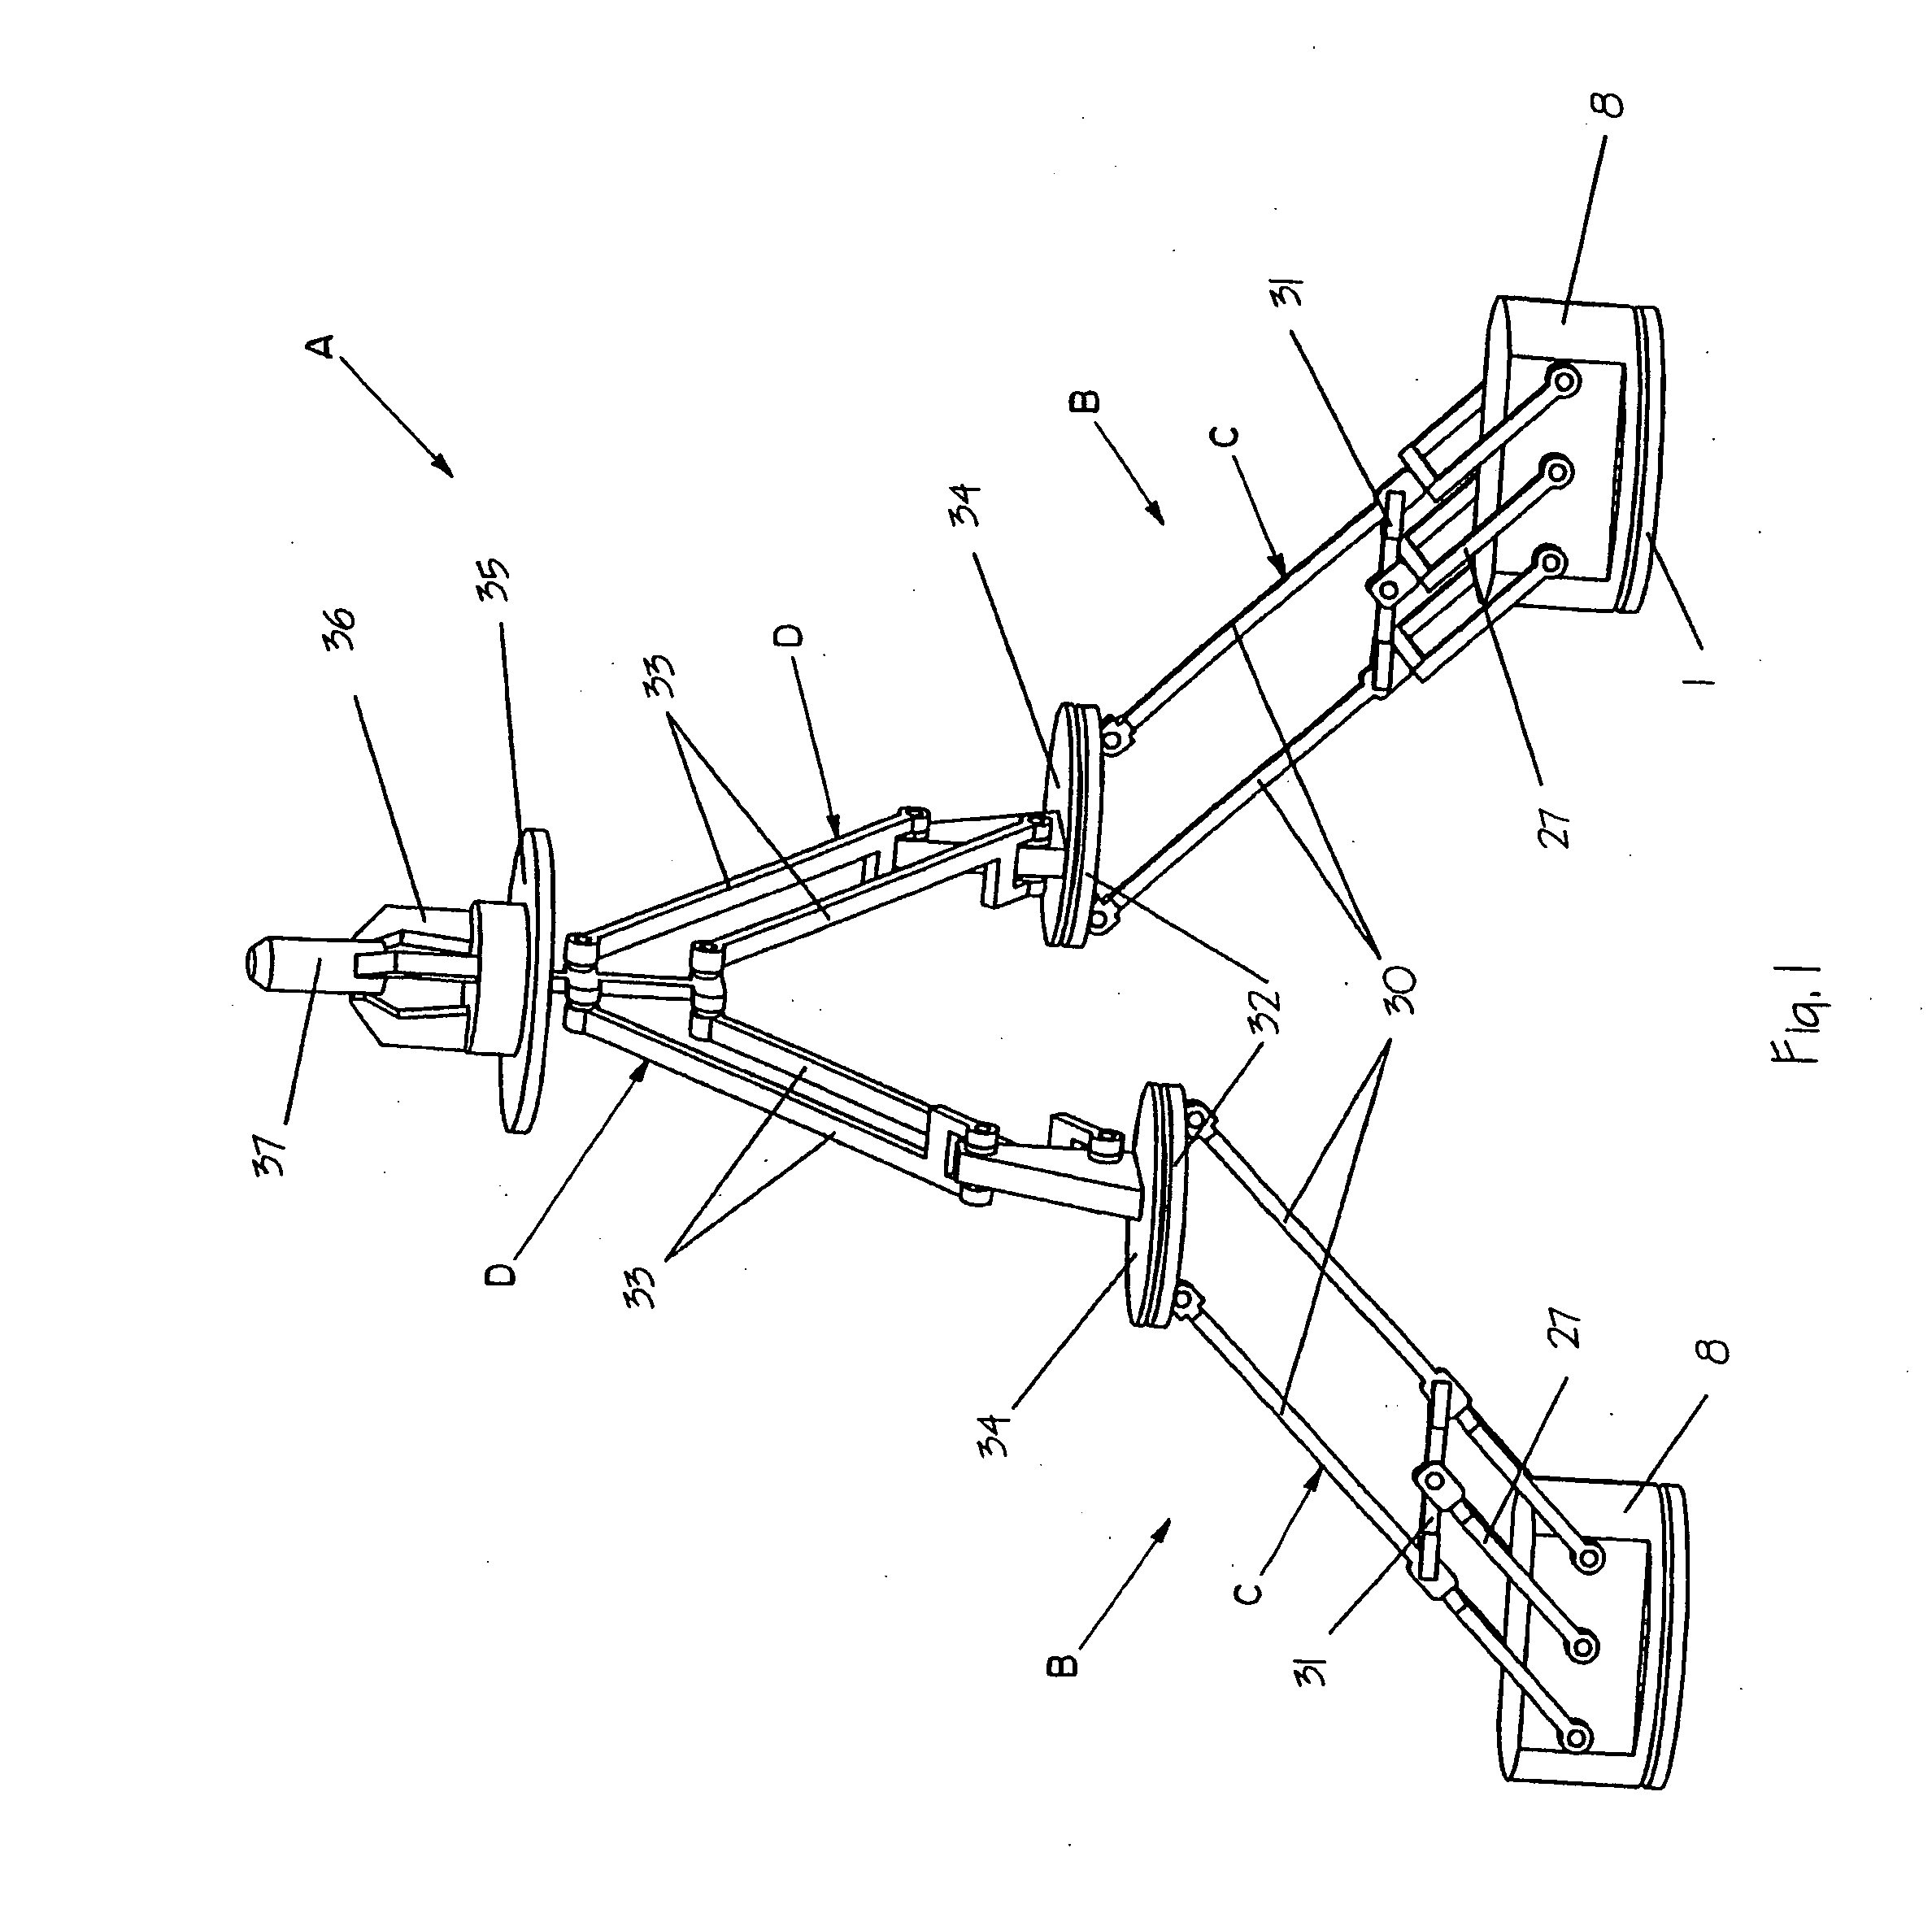 Four-degree-of-freedom parallel manipulator for producing schonflies motions